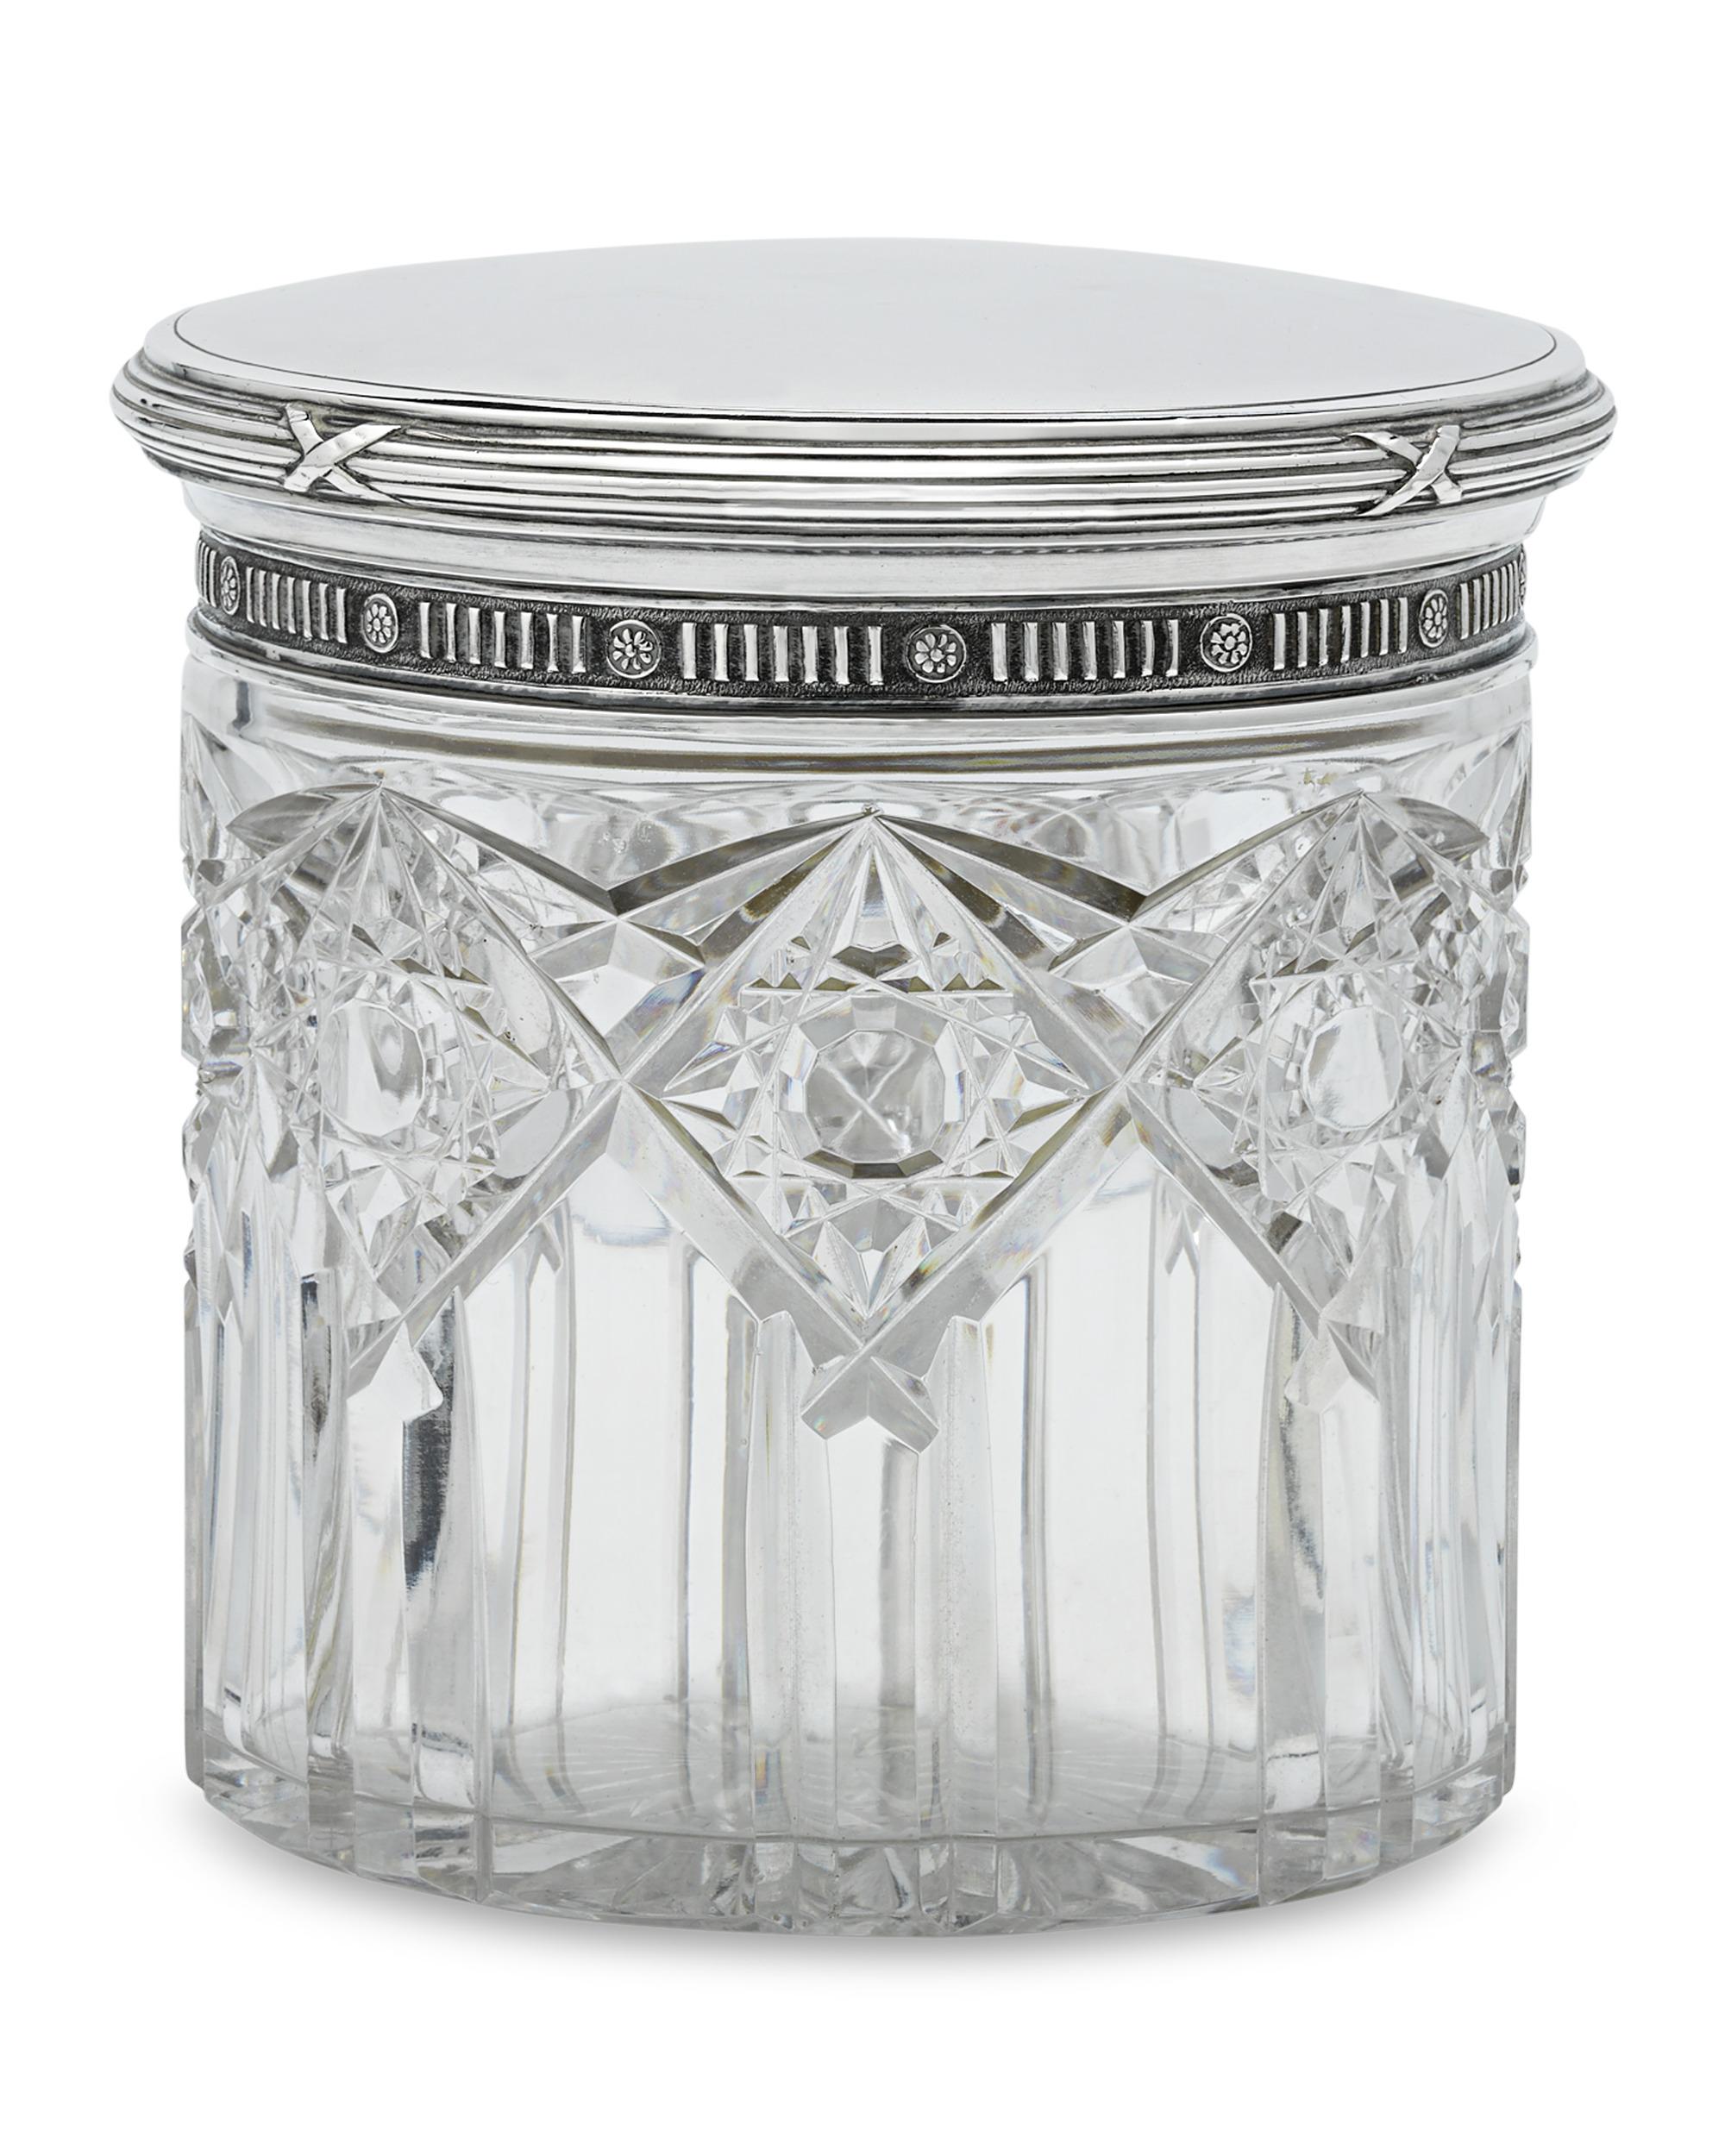 Beautifully rare, this superb silver-mounted cut glass toilette box was crafted by legendary Russian jeweler and artisan Peter Carl Fabergé. The rounded cut glass box features a prism pattern and geometric hobnail star etchings along the top. The